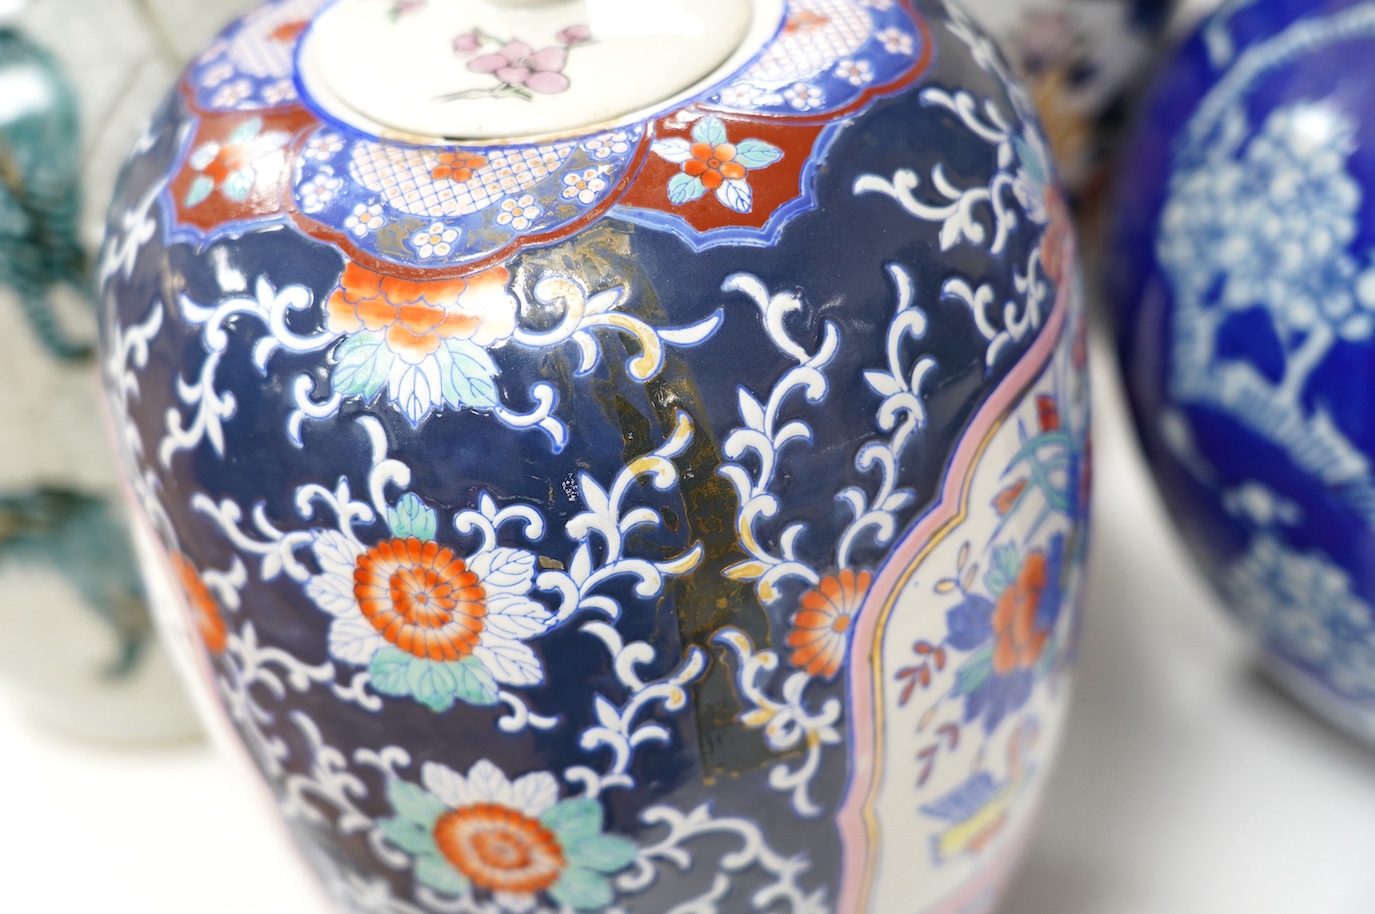 Two Japanese Imari vases and three various Chinese vases, largest 46cm. Condition - poor